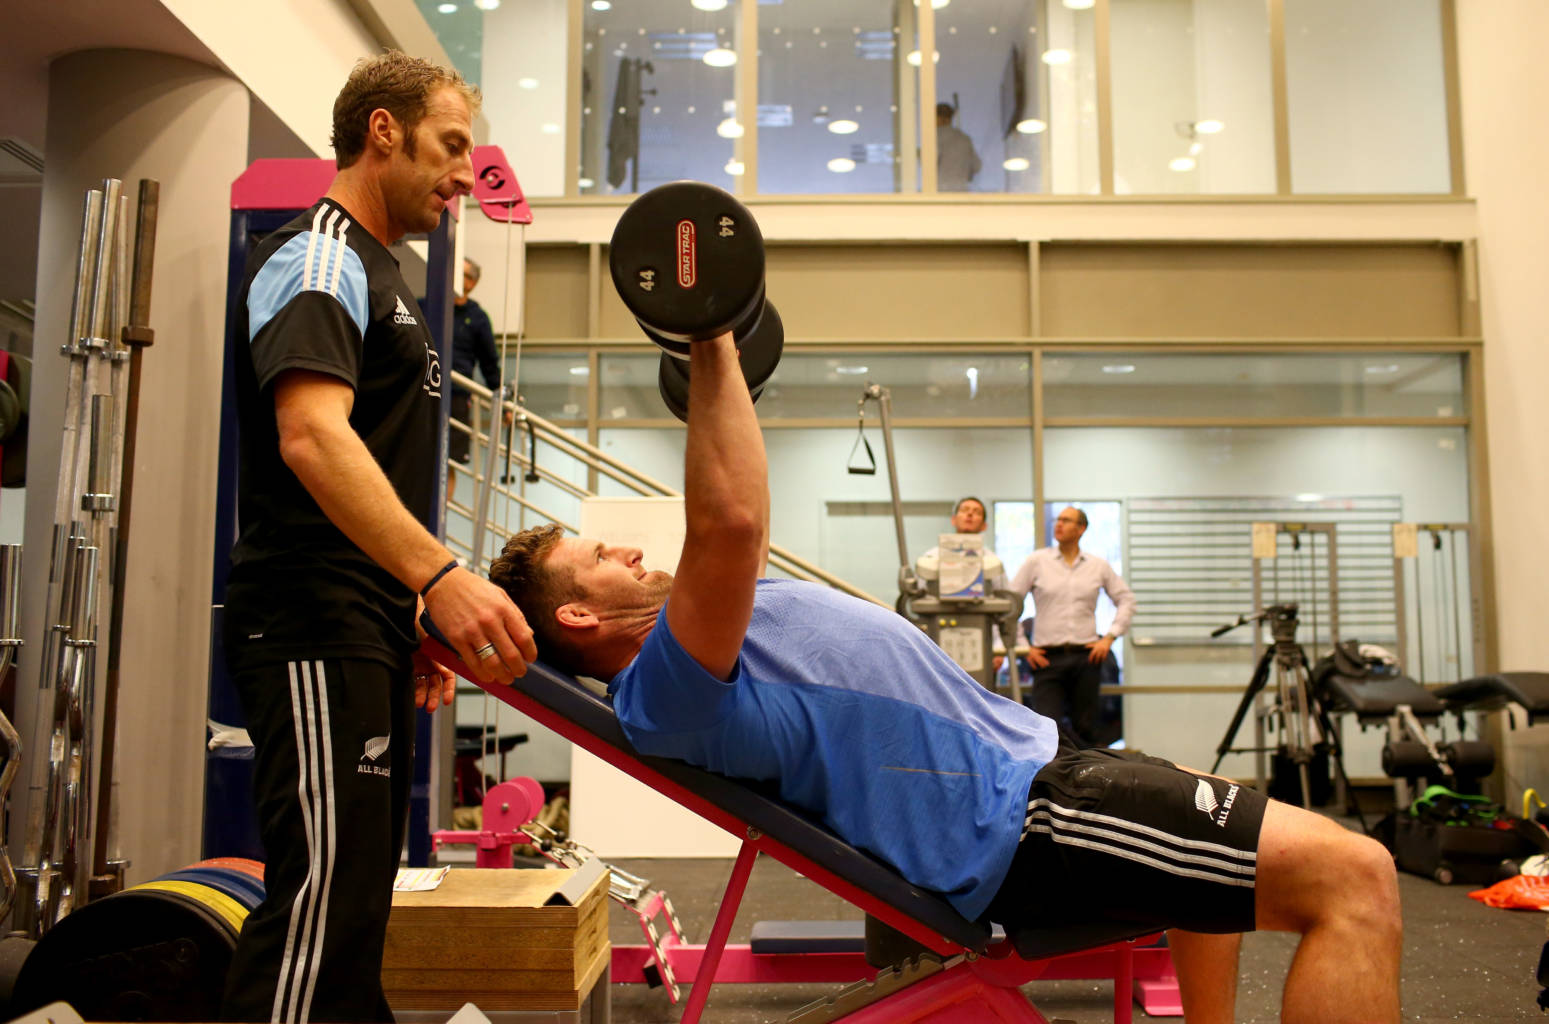 PARIS, FRANCE - NOVEMBER 04:  Kieran Read of the All Blacks lifts weights with assistance from trainer Nic Gill during a New Zealand All Blacks gym session at the Stade Jean Bouin on November 4, 2013 in Paris, France.  (Photo by Phil Walter/Getty Images)